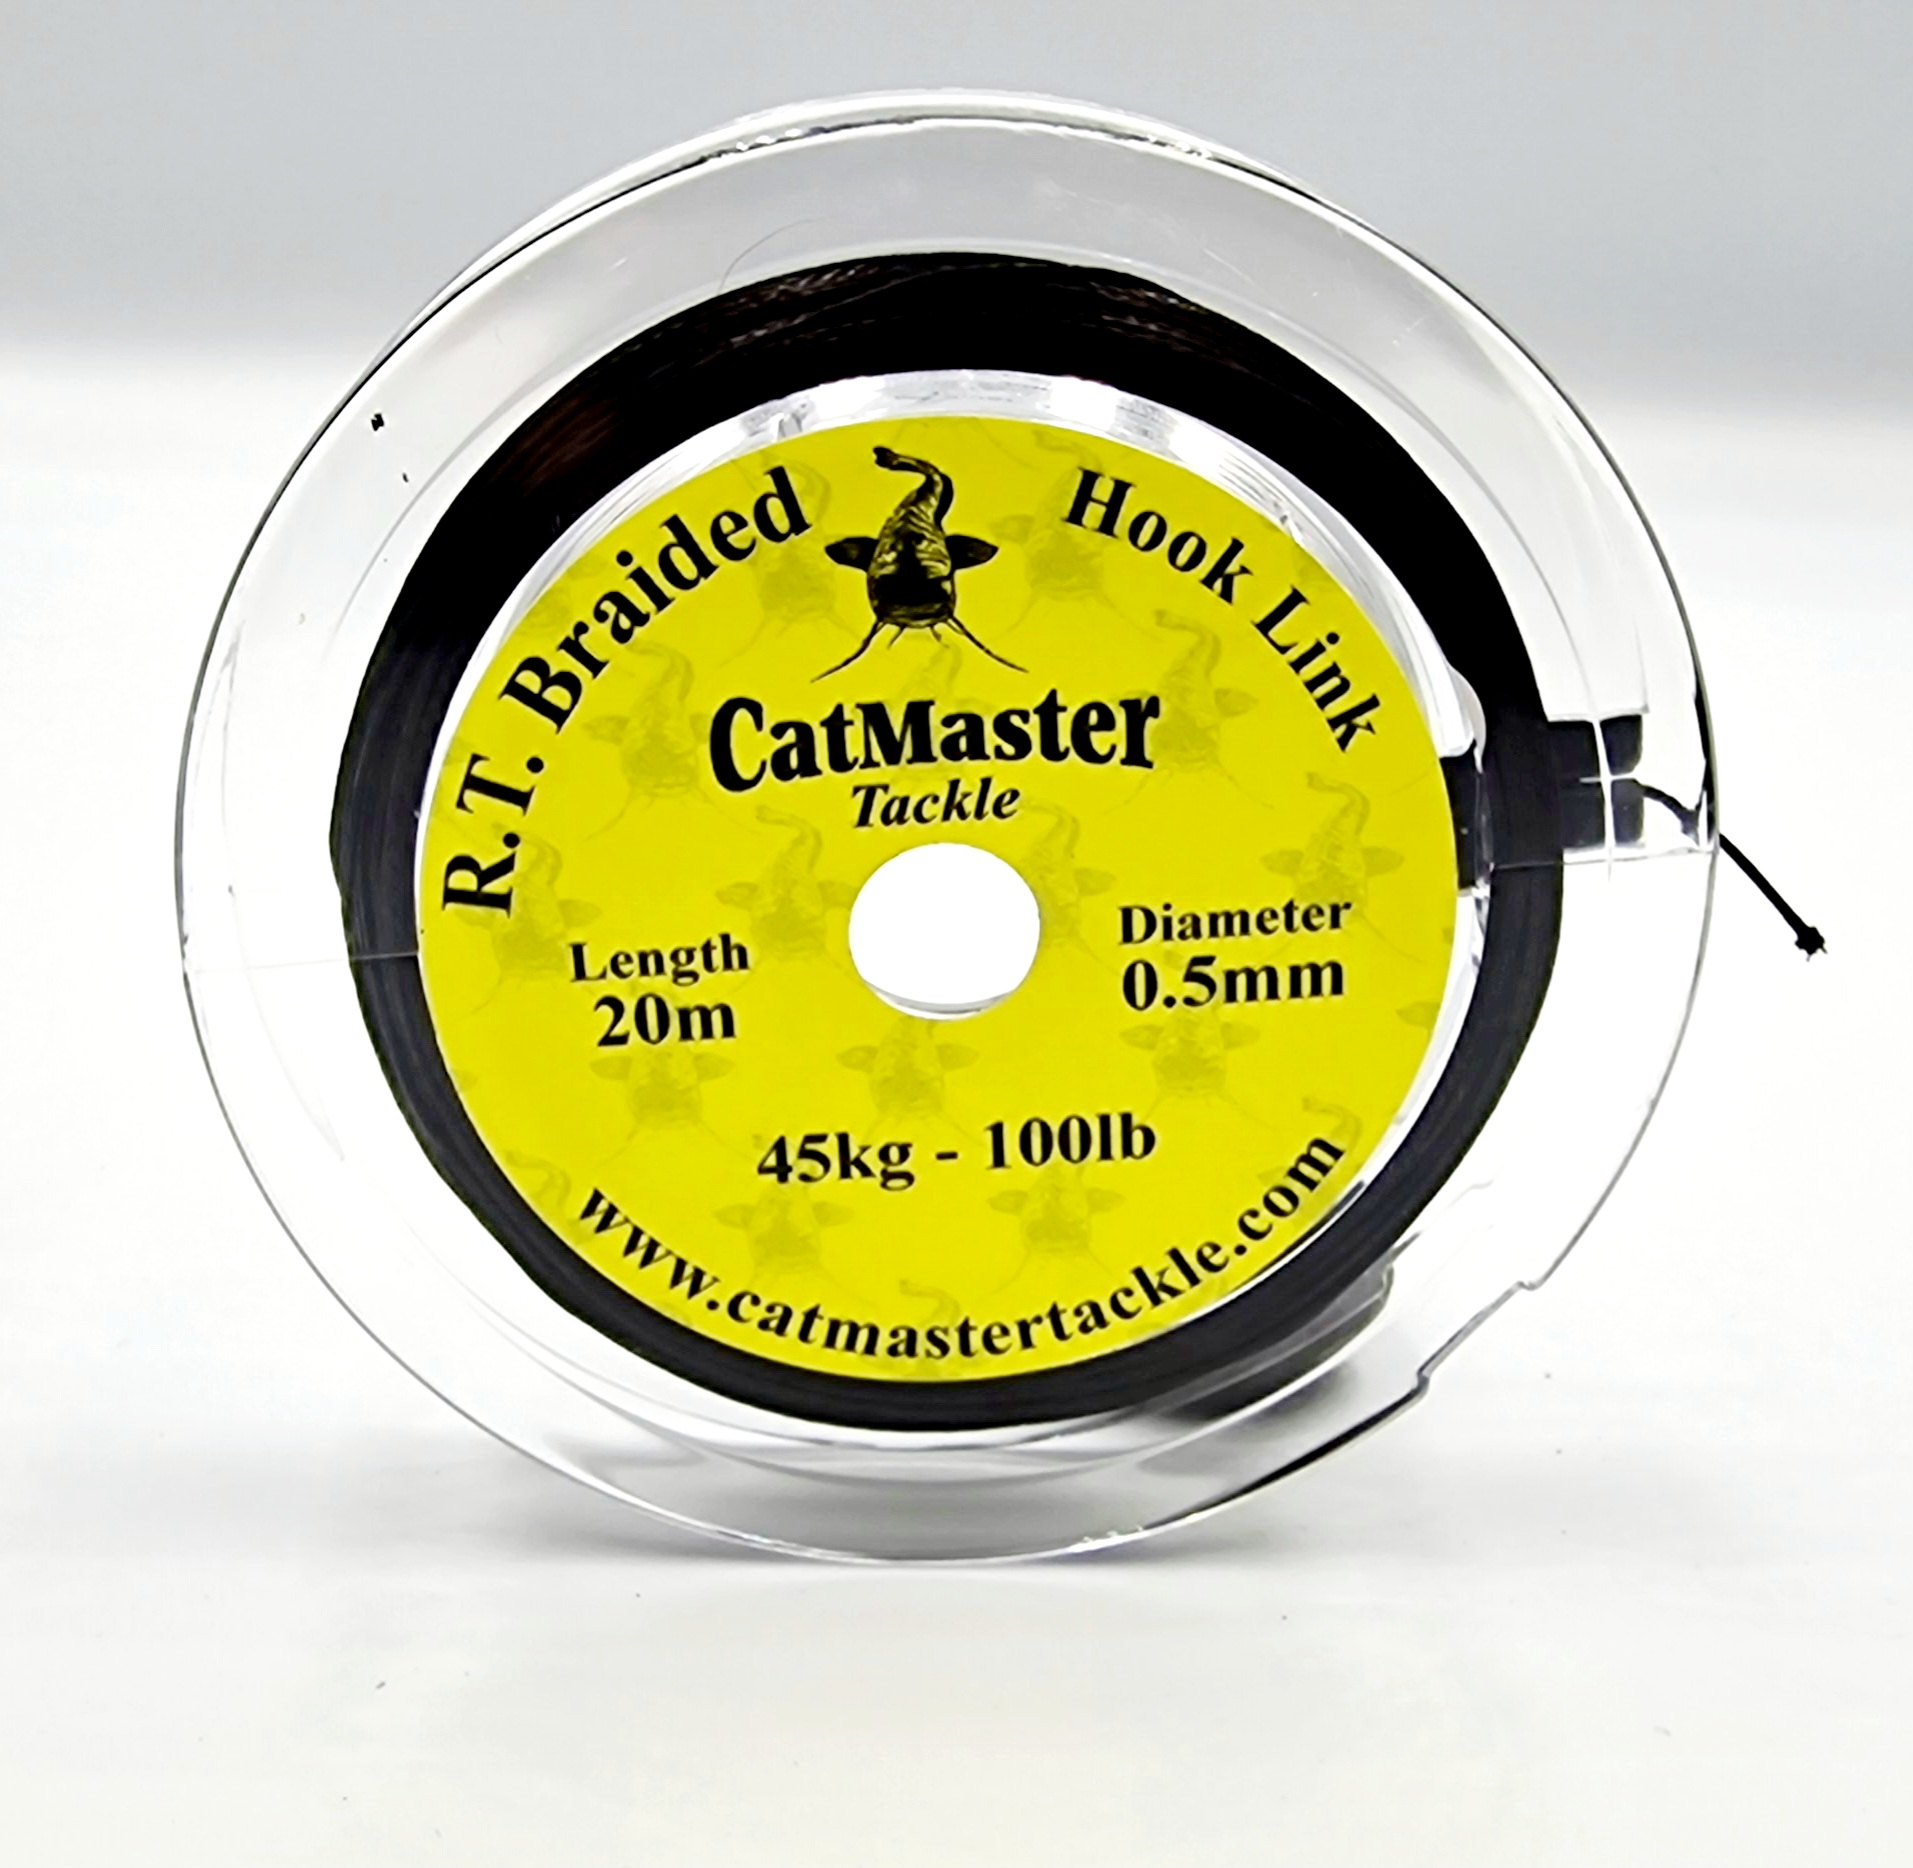 CatMaster Tackle R.T. Braided Cat Leader 100lb Black 20 Metre Spool